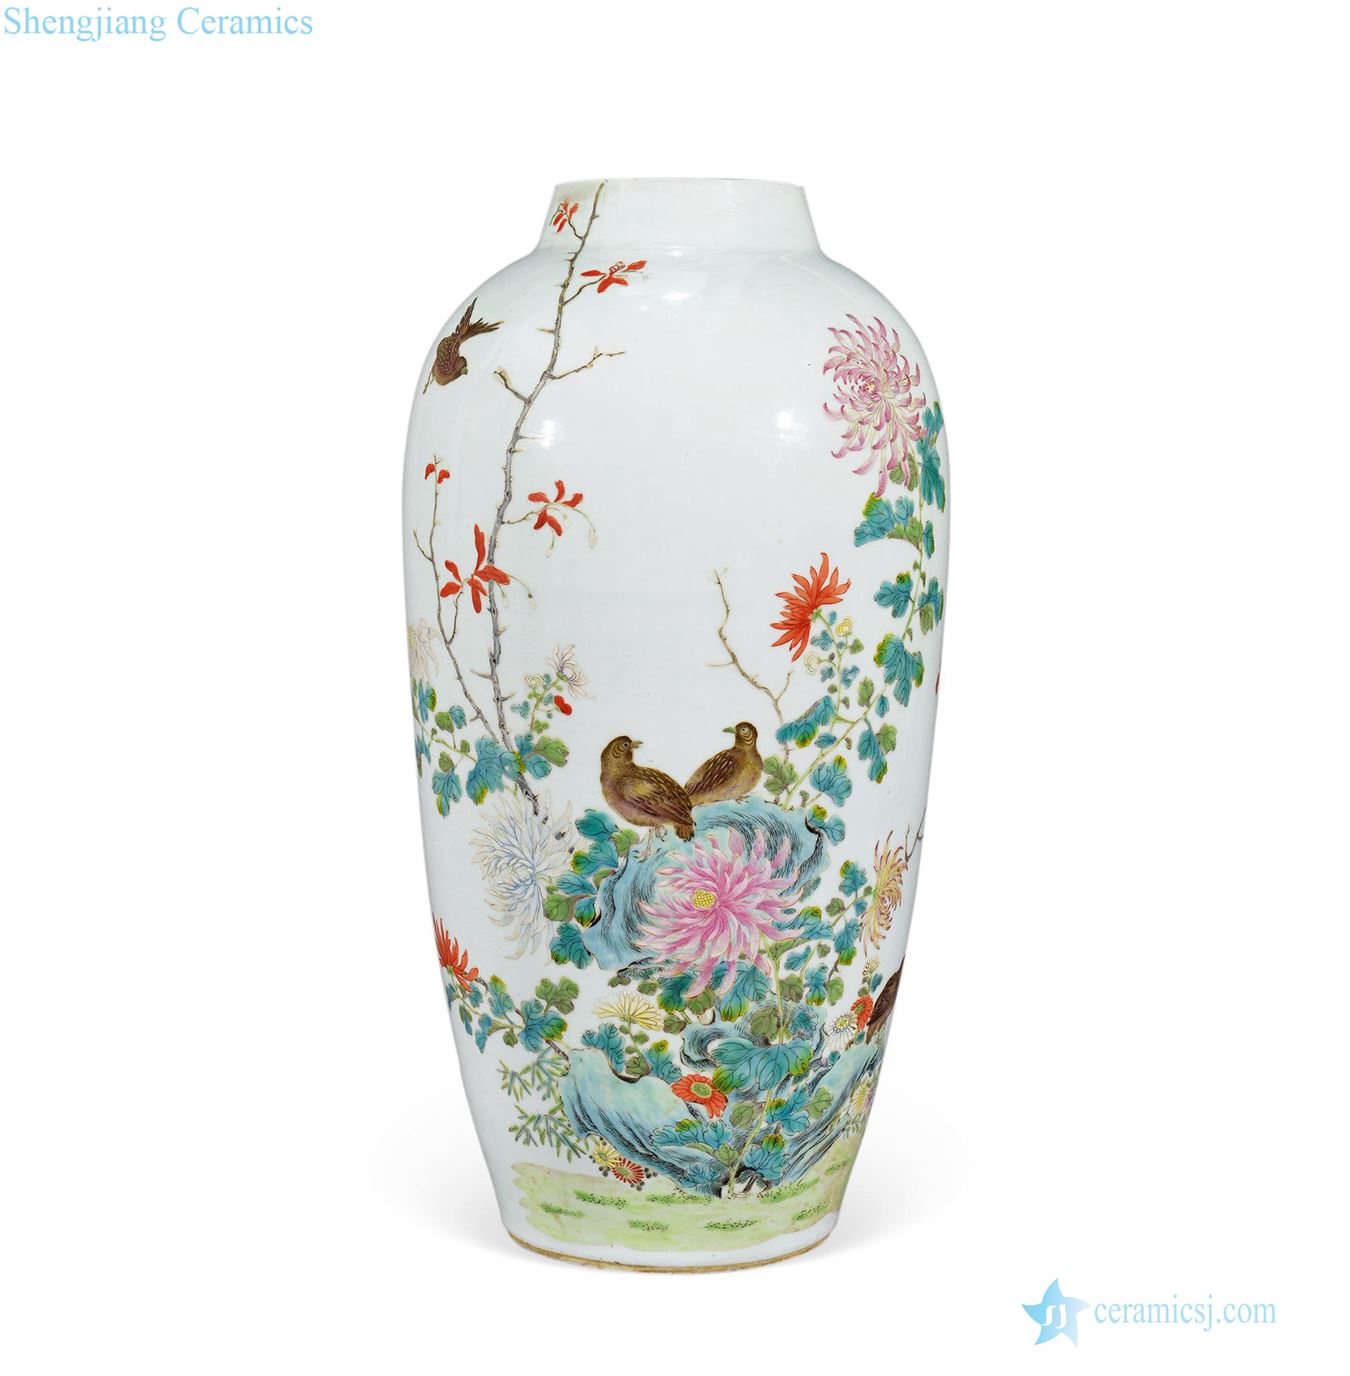 Pastel reign of qing emperor guangxu to live and work in peace and contentment goddess of mercy bottle